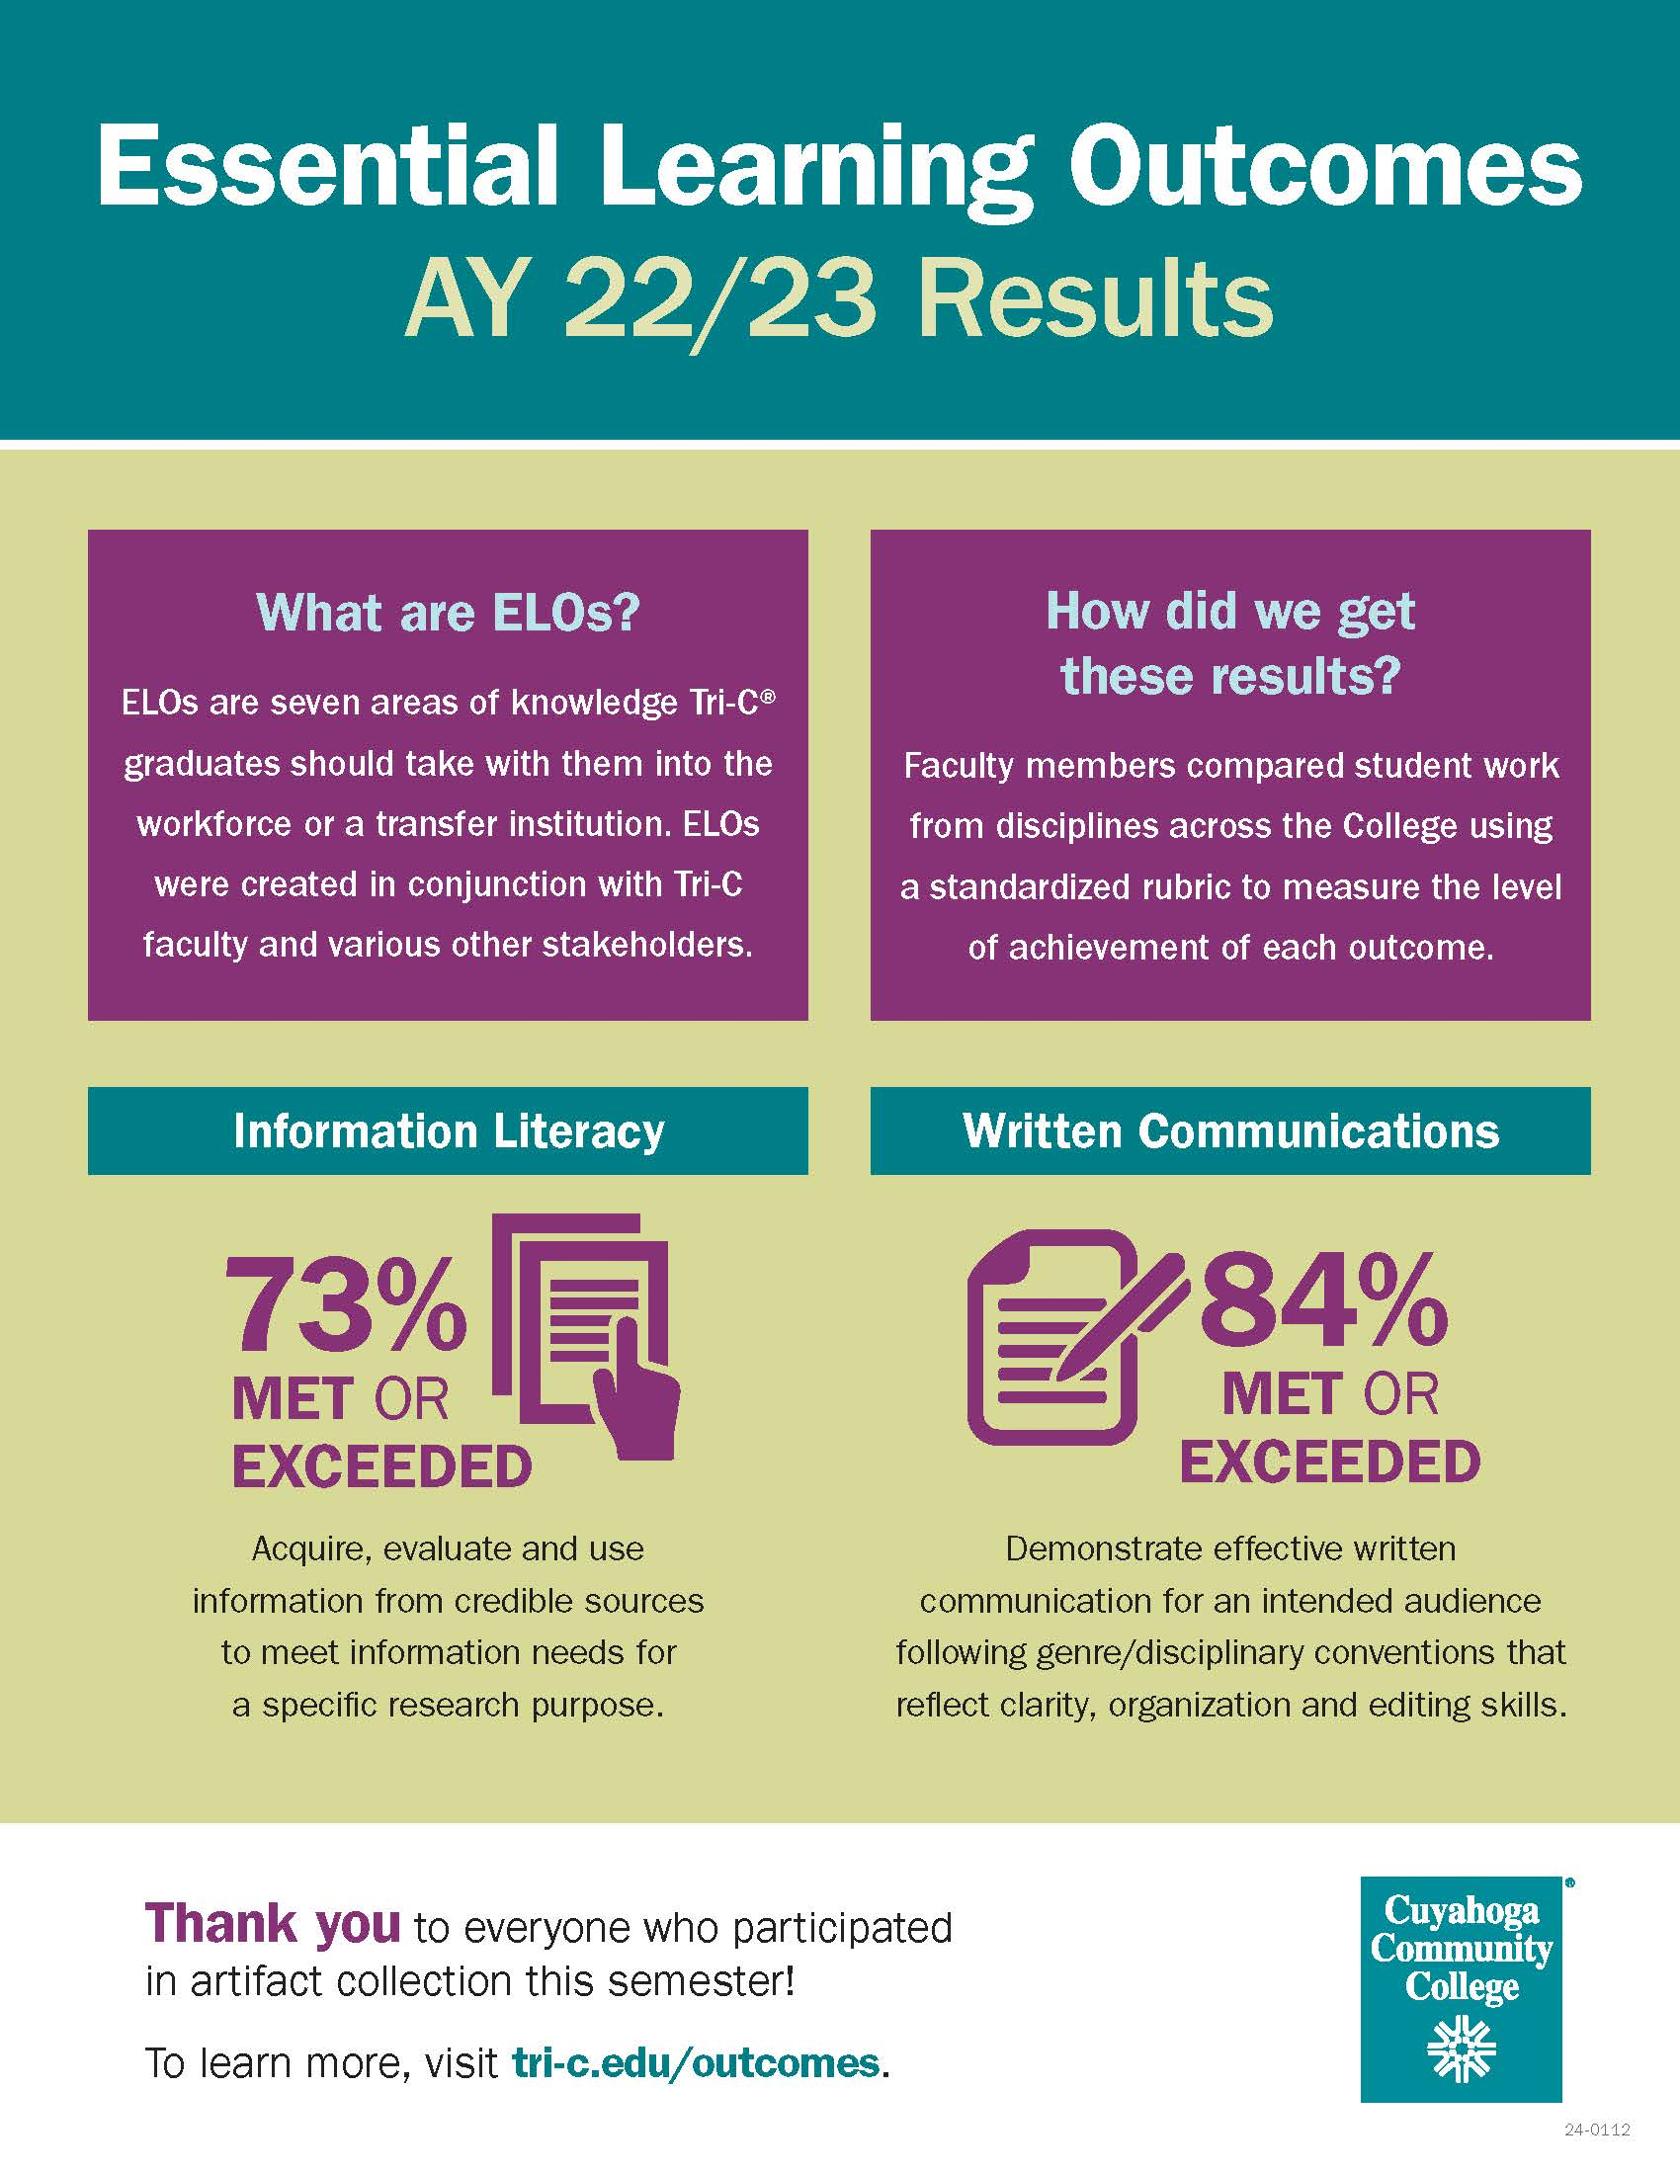 Essential Learning Outcomes AY 22/23 Results